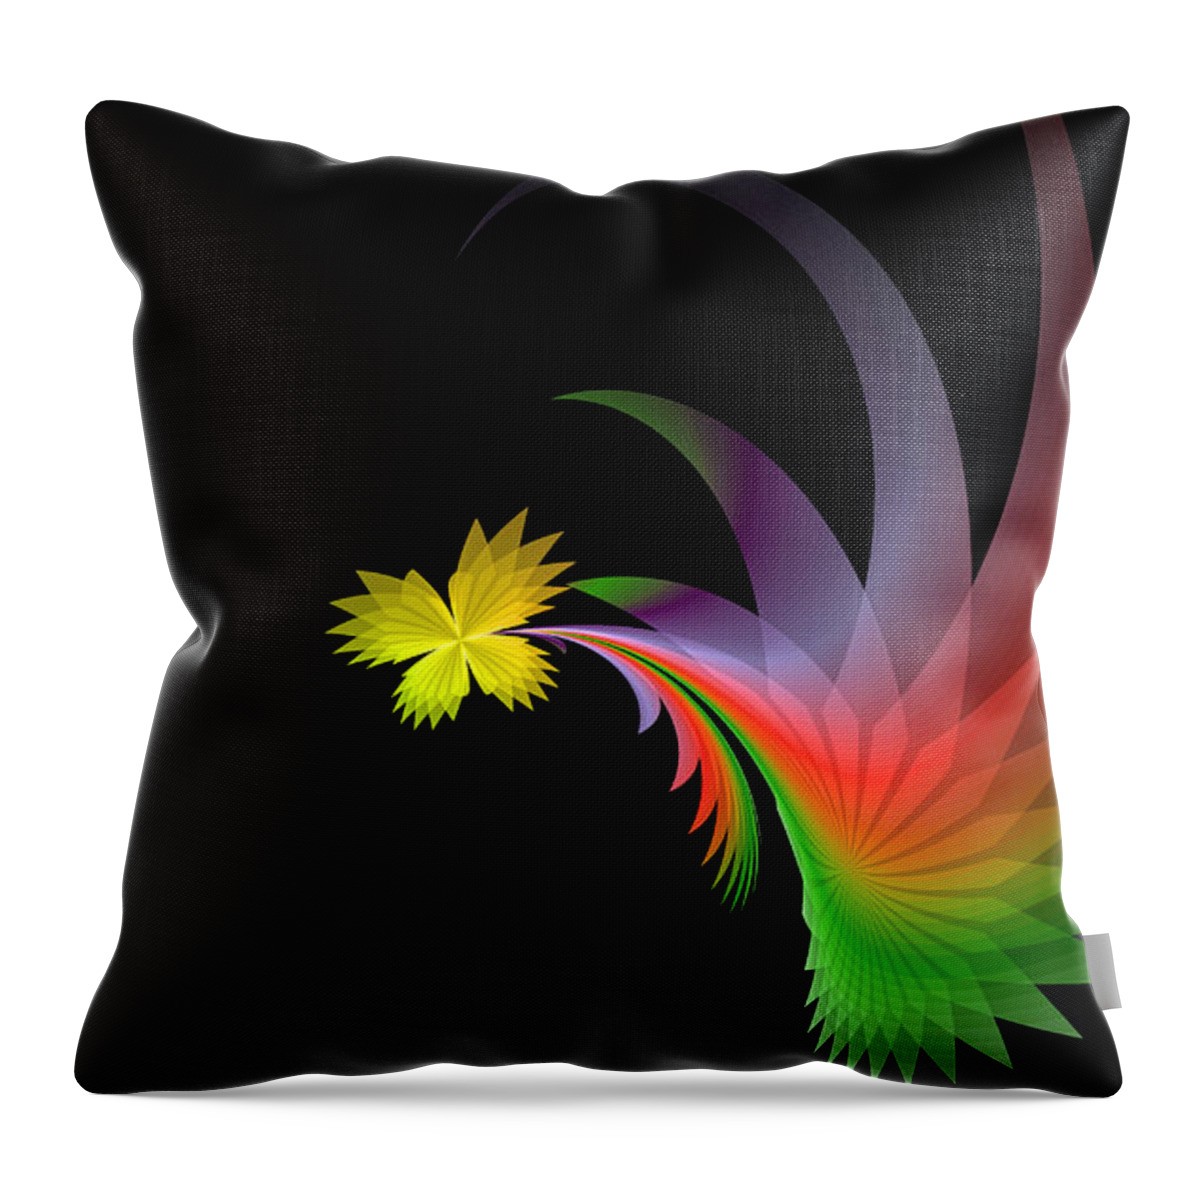 Fractal Throw Pillow featuring the digital art Butterfly Dreams by Gary Blackman